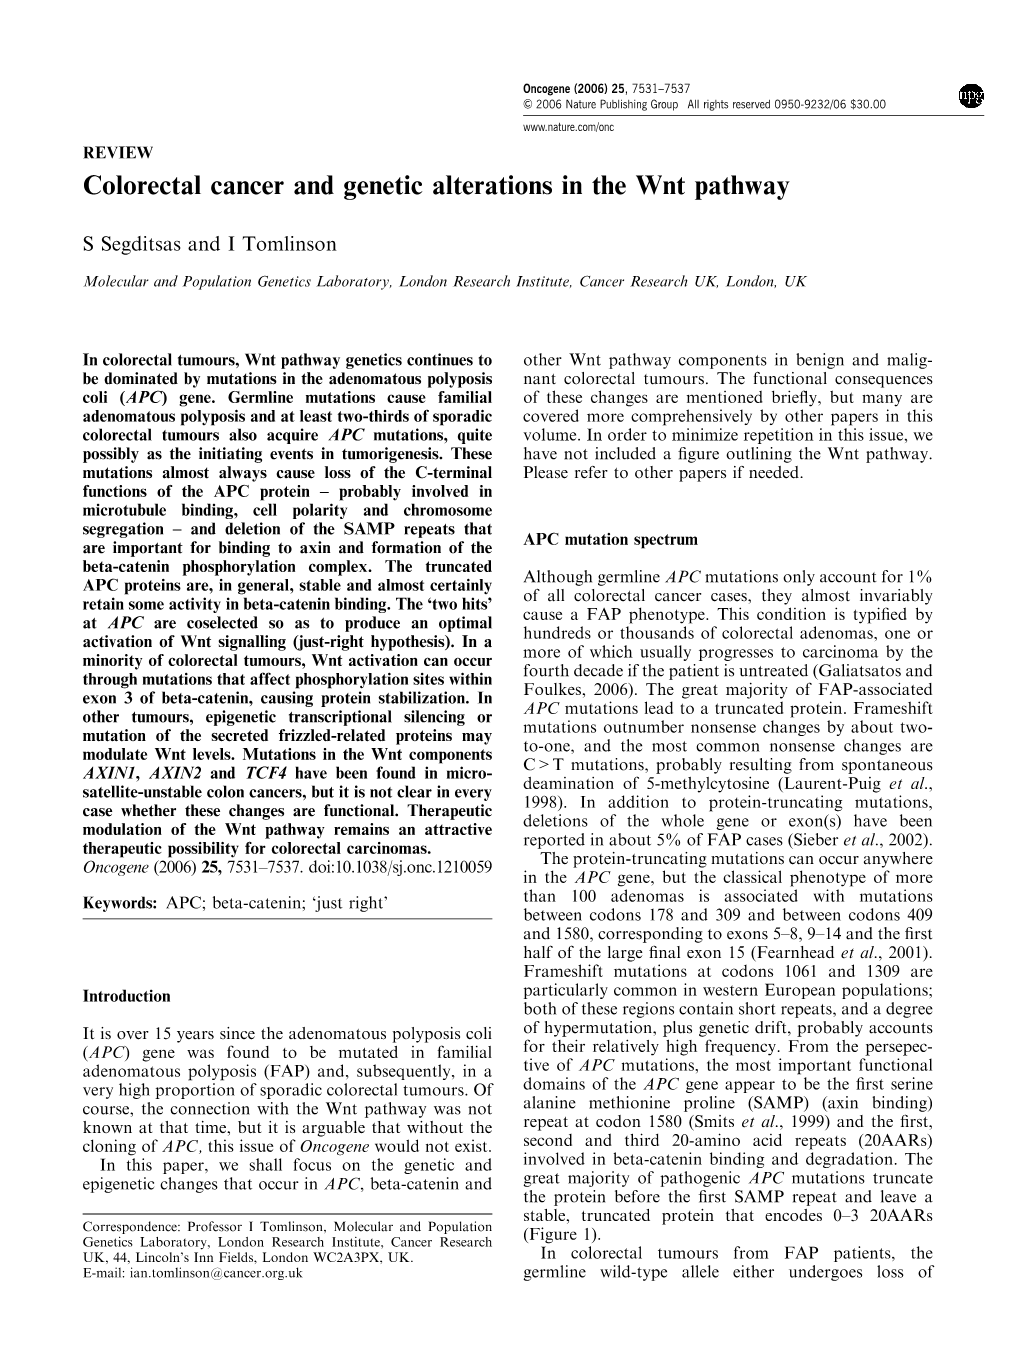 Colorectal Cancer and Genetic Alterations in the Wnt Pathway